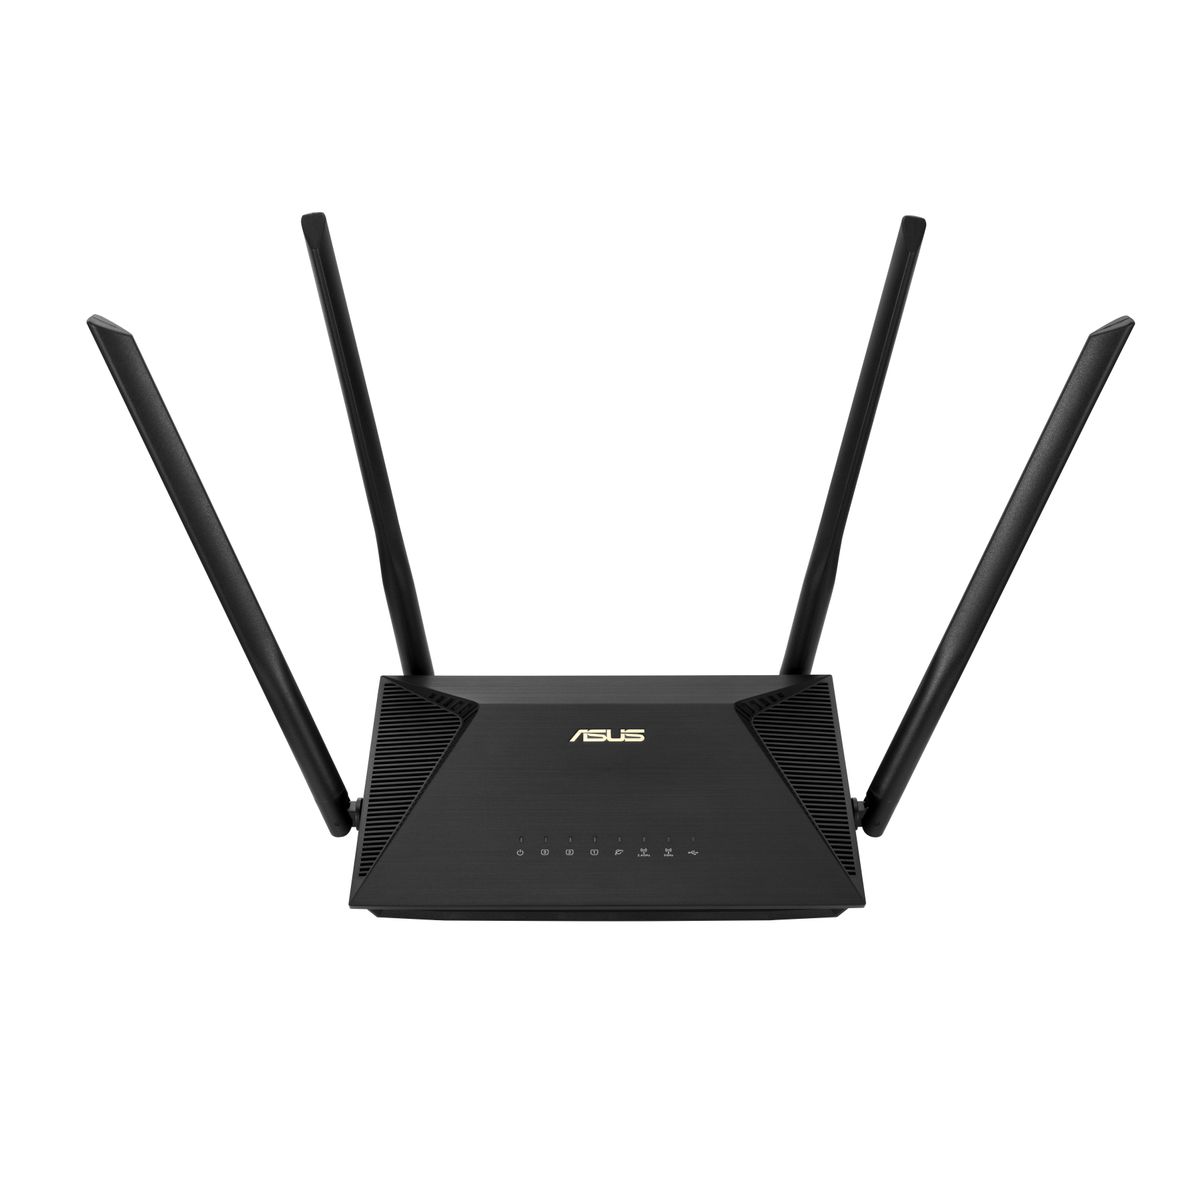 Asus RT-AX53U Home Office Router Wi-Fi 6 AX1800 Gigabit Quad-Core CPU USB AiProtection